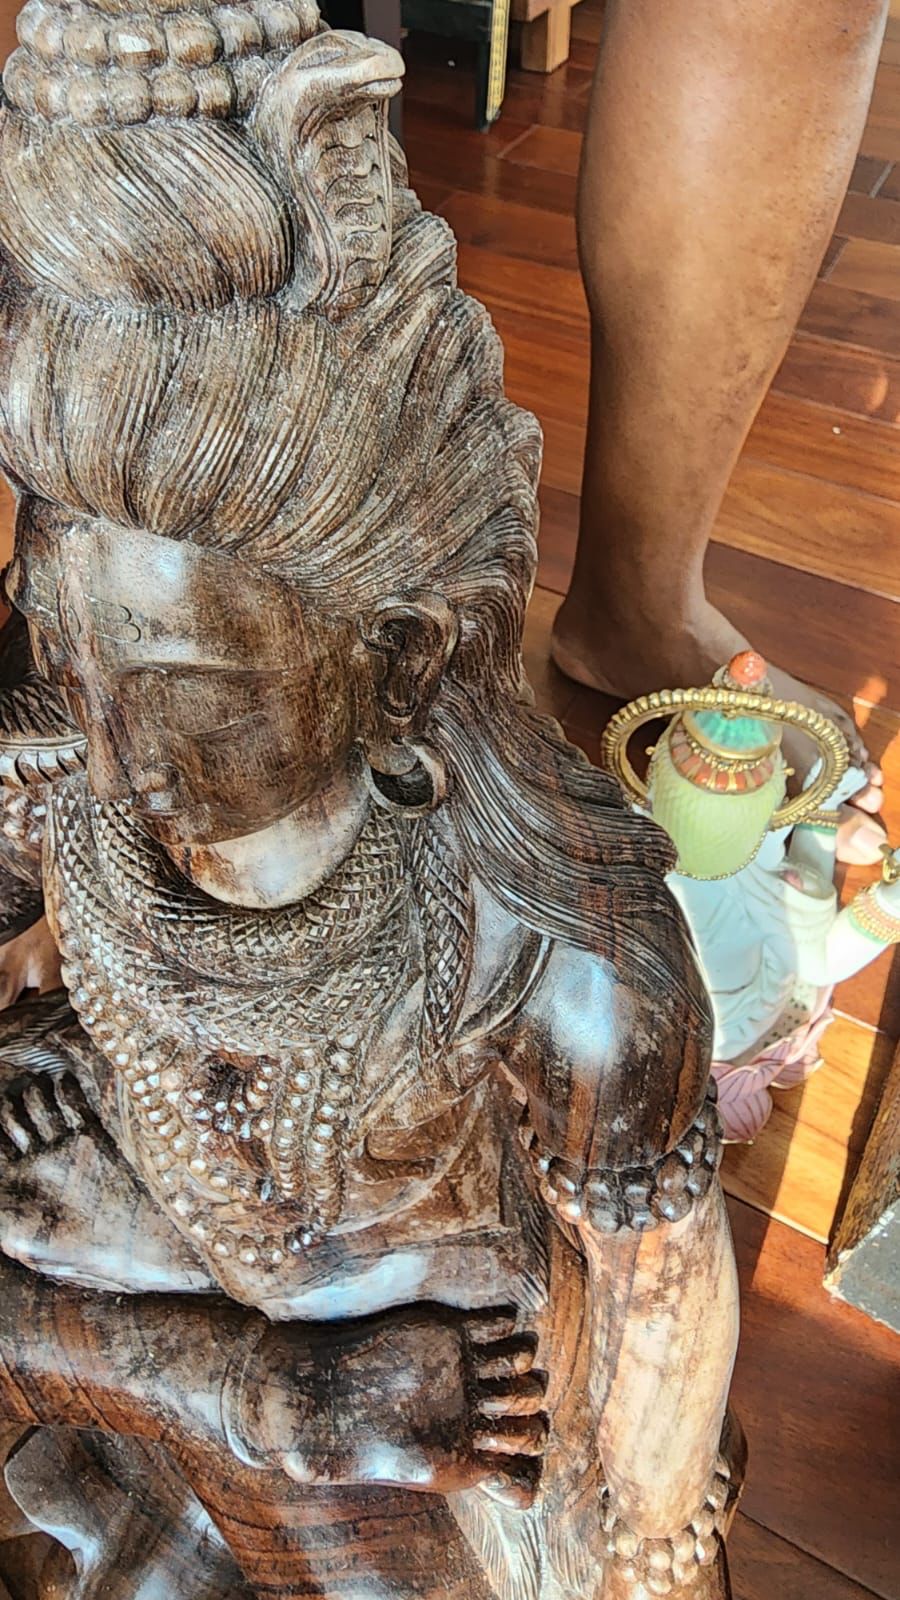 Wooden statue repair and polishing